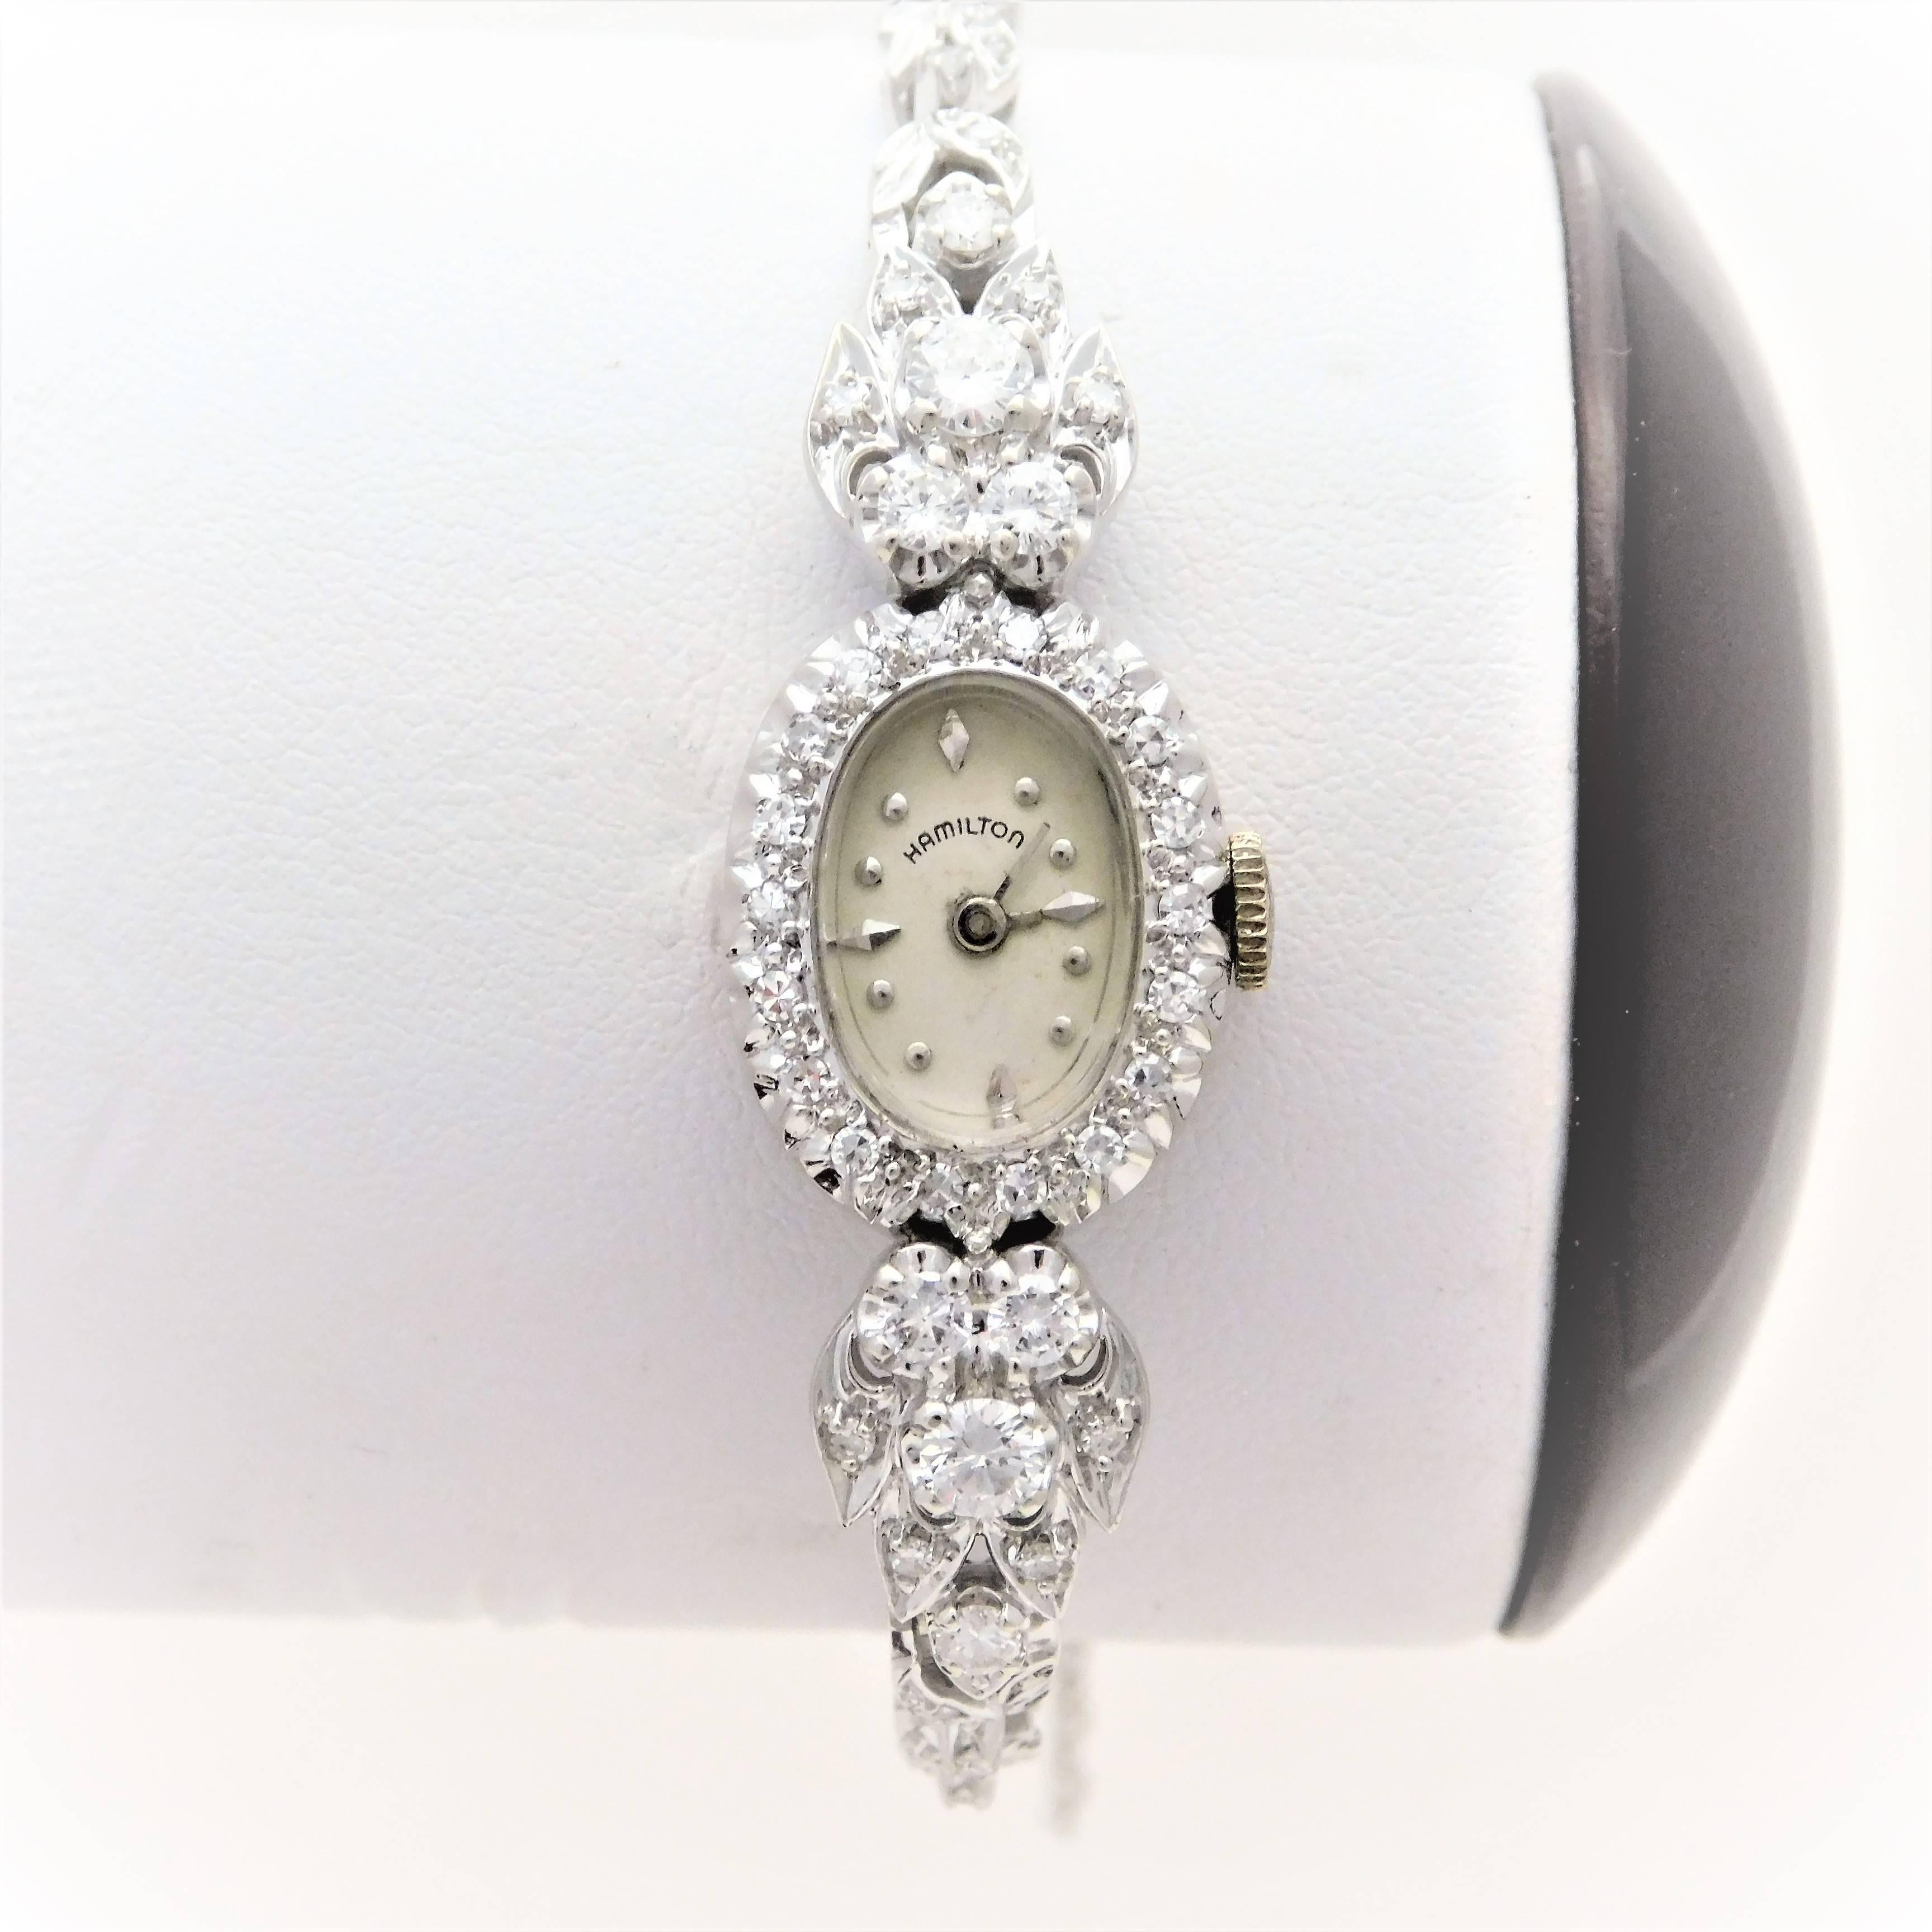 From an elegant New Orleans estate.  Circa 1920.  This gorgeous art deco style Hamilton ladies’ luxury time piece has been crafted in solid 14k white gold.  The ornate diamond designs in the bezel and the band are breathtaking.  It is jeweled with